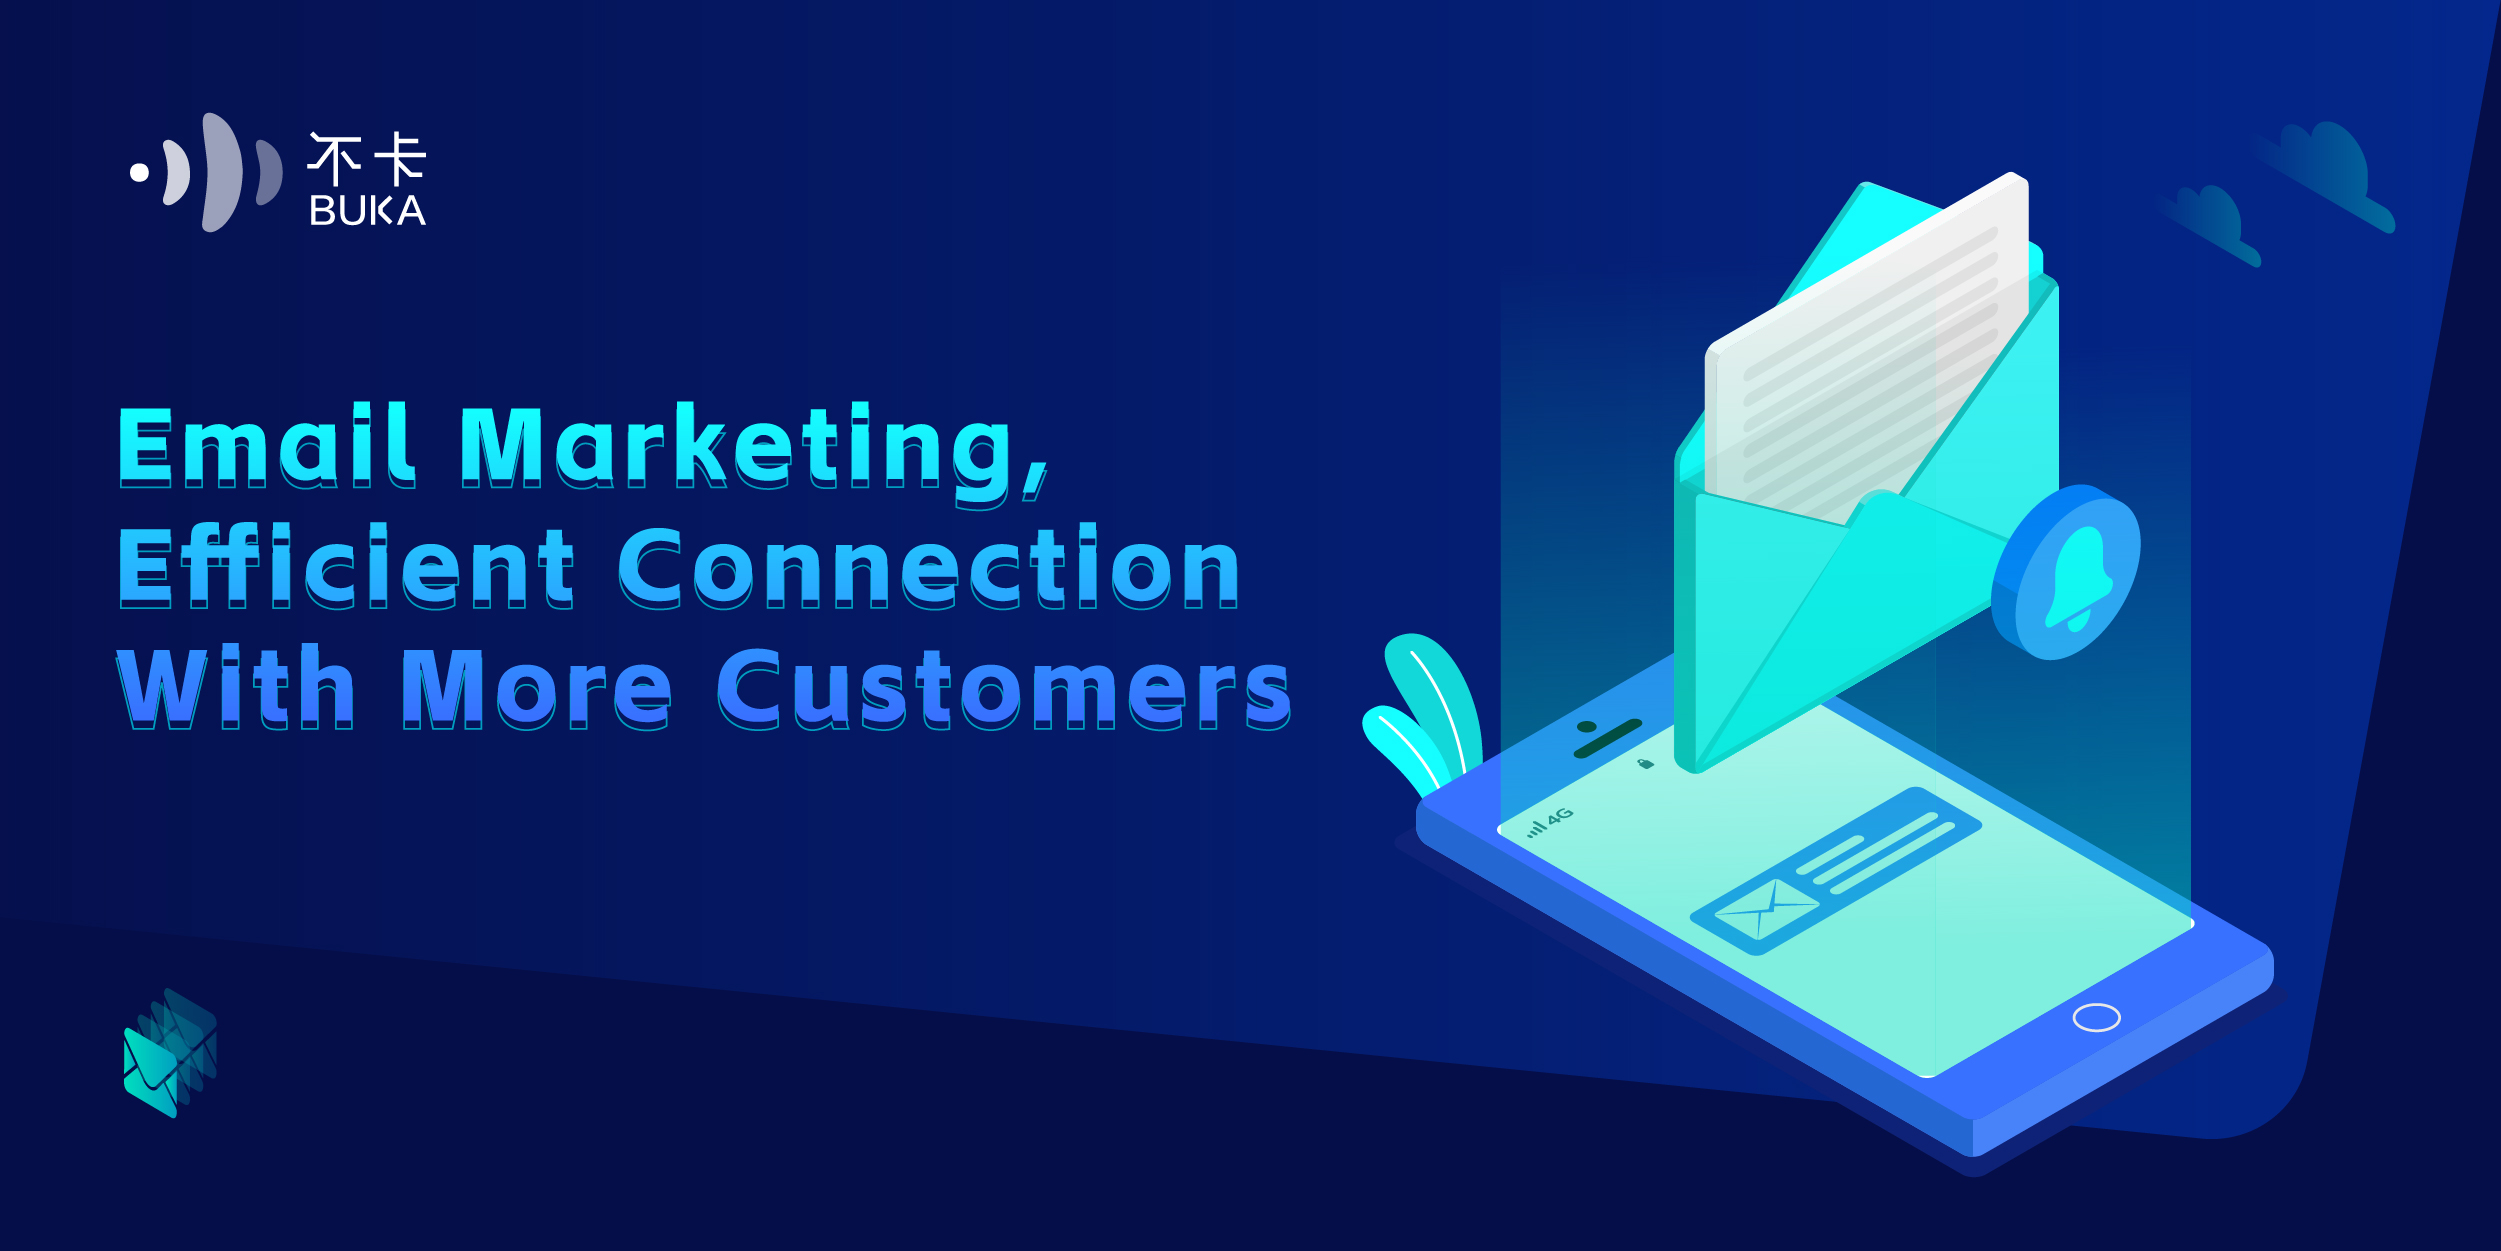 Stunning News: Email--Efficient Connection with More Customers